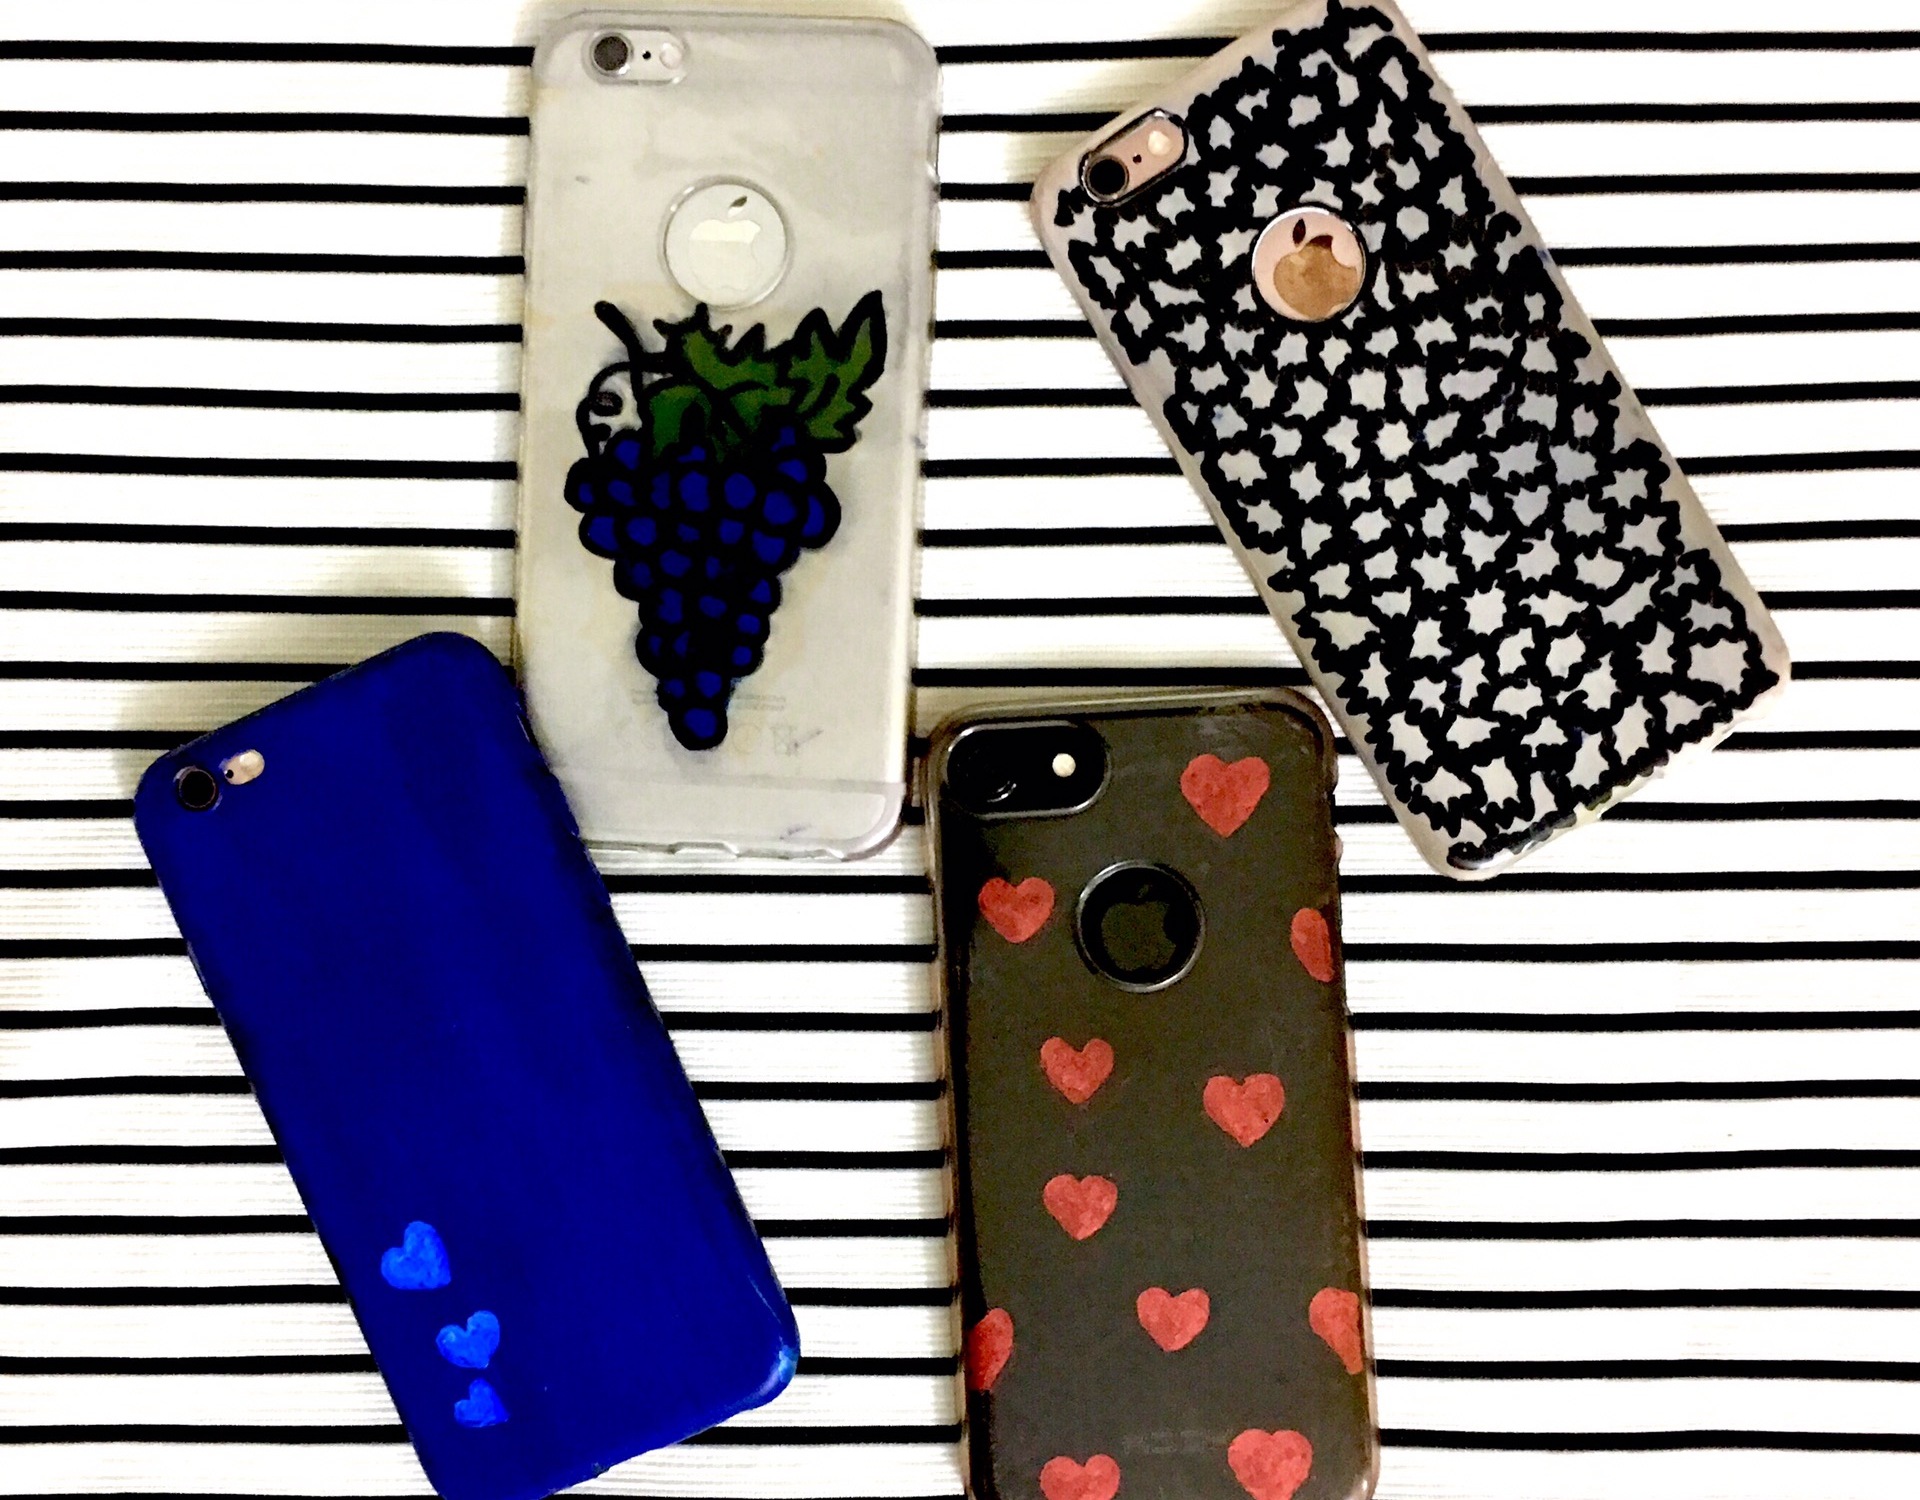 painted phone case ideas